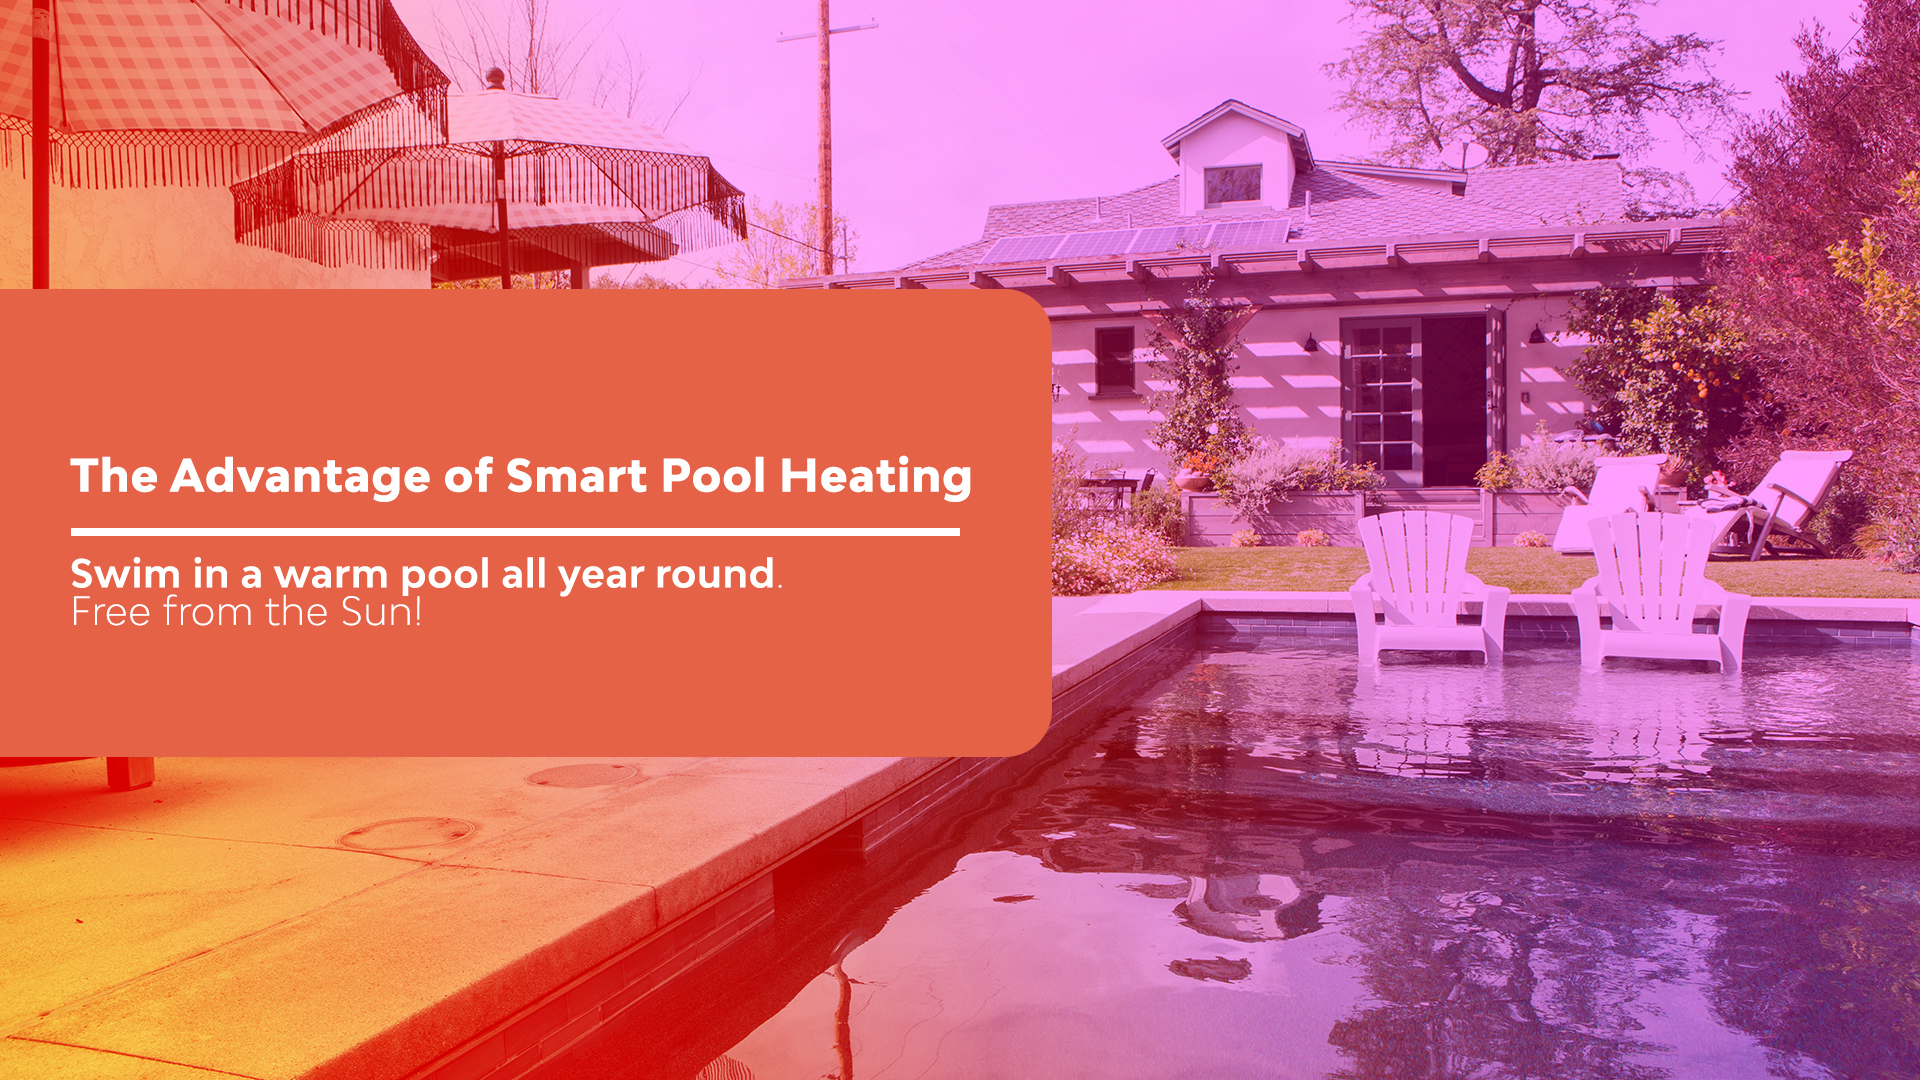 Advantages of Smart Pool Heating: Swim Year-Round, Sun-Free - featured image